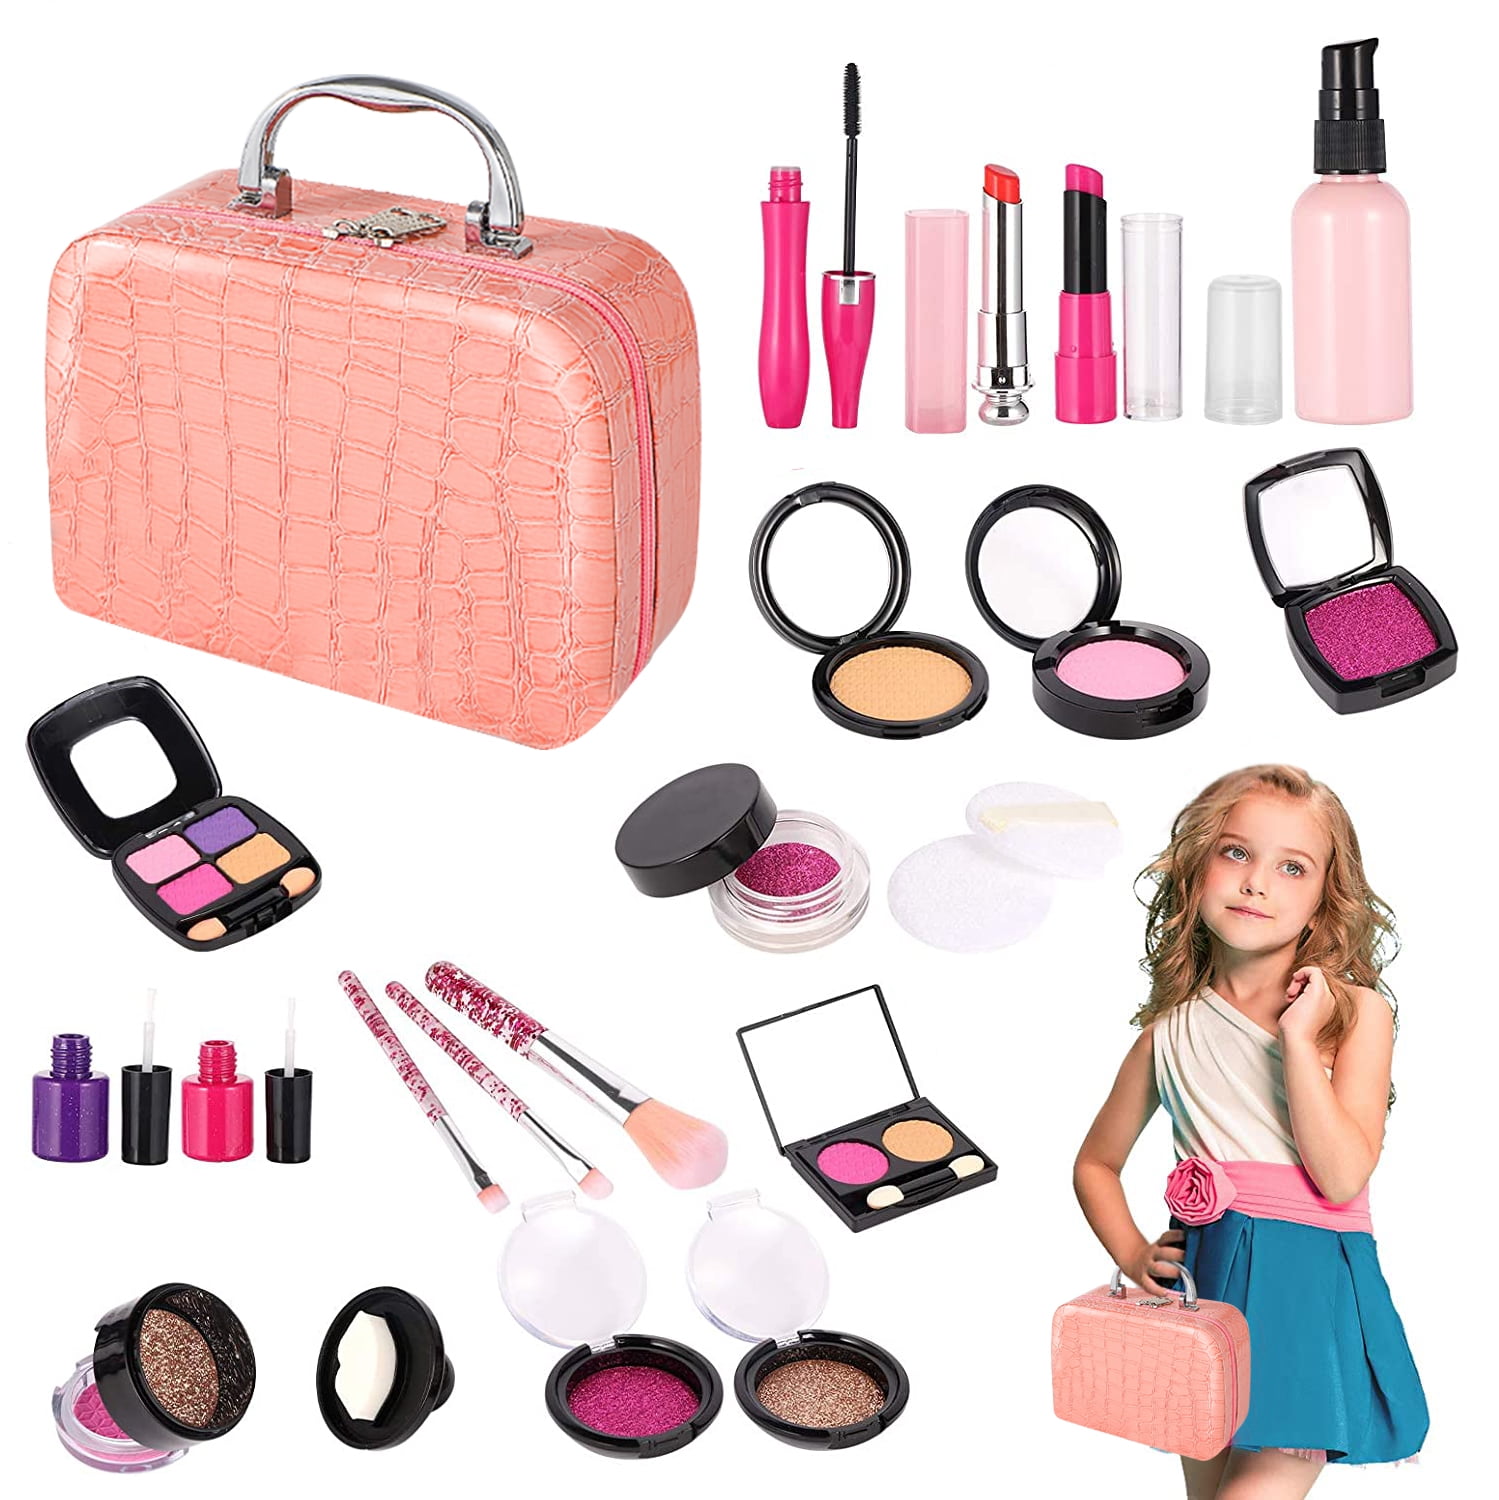 Kids Pretend Makeup Kit with Cosmetic Bag for Girls 3-10 Year Old -  Including Pink Brushes,Eye Shadows, Lipstick,Mascare,Gittler Pot, Liquid